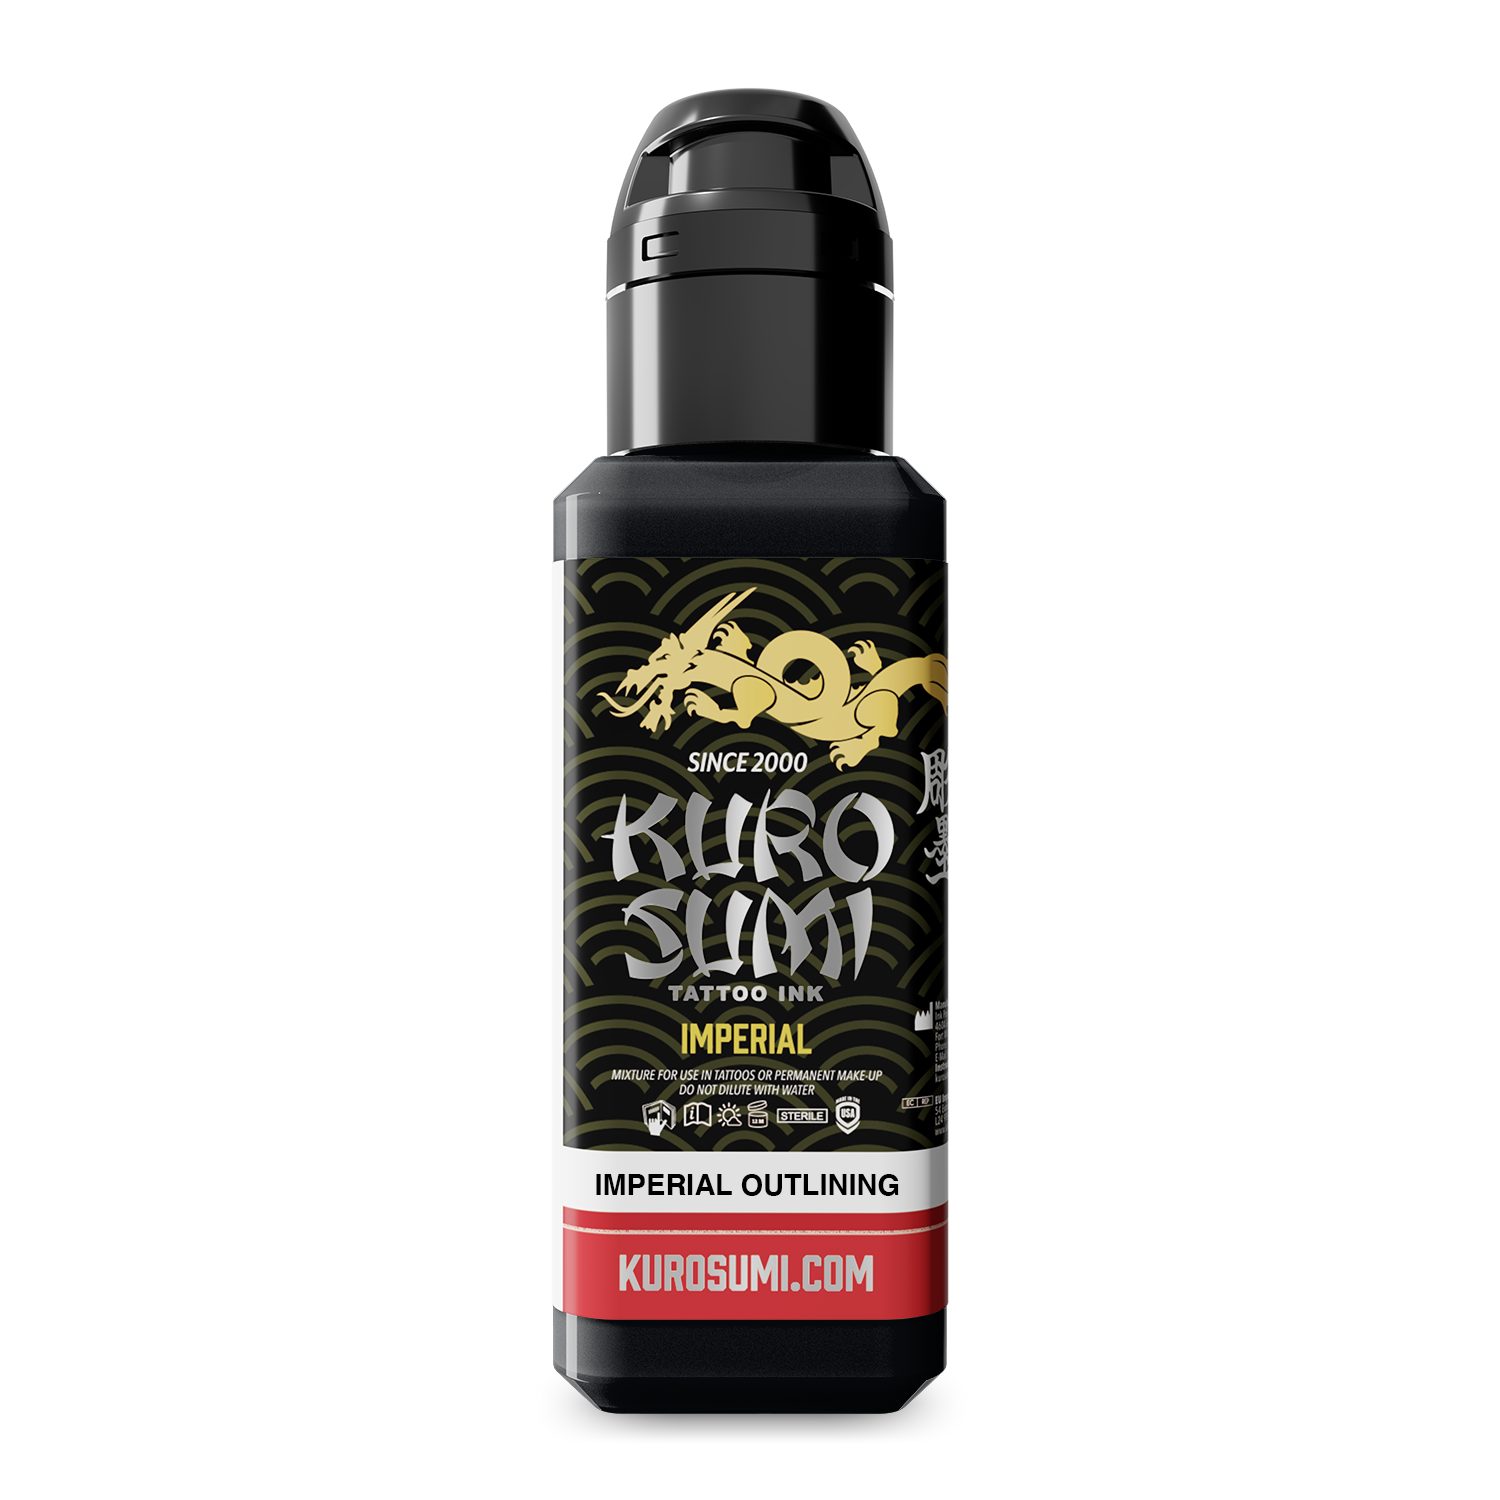 Kuro Sumi - Imperial - Outlining - 44 ml